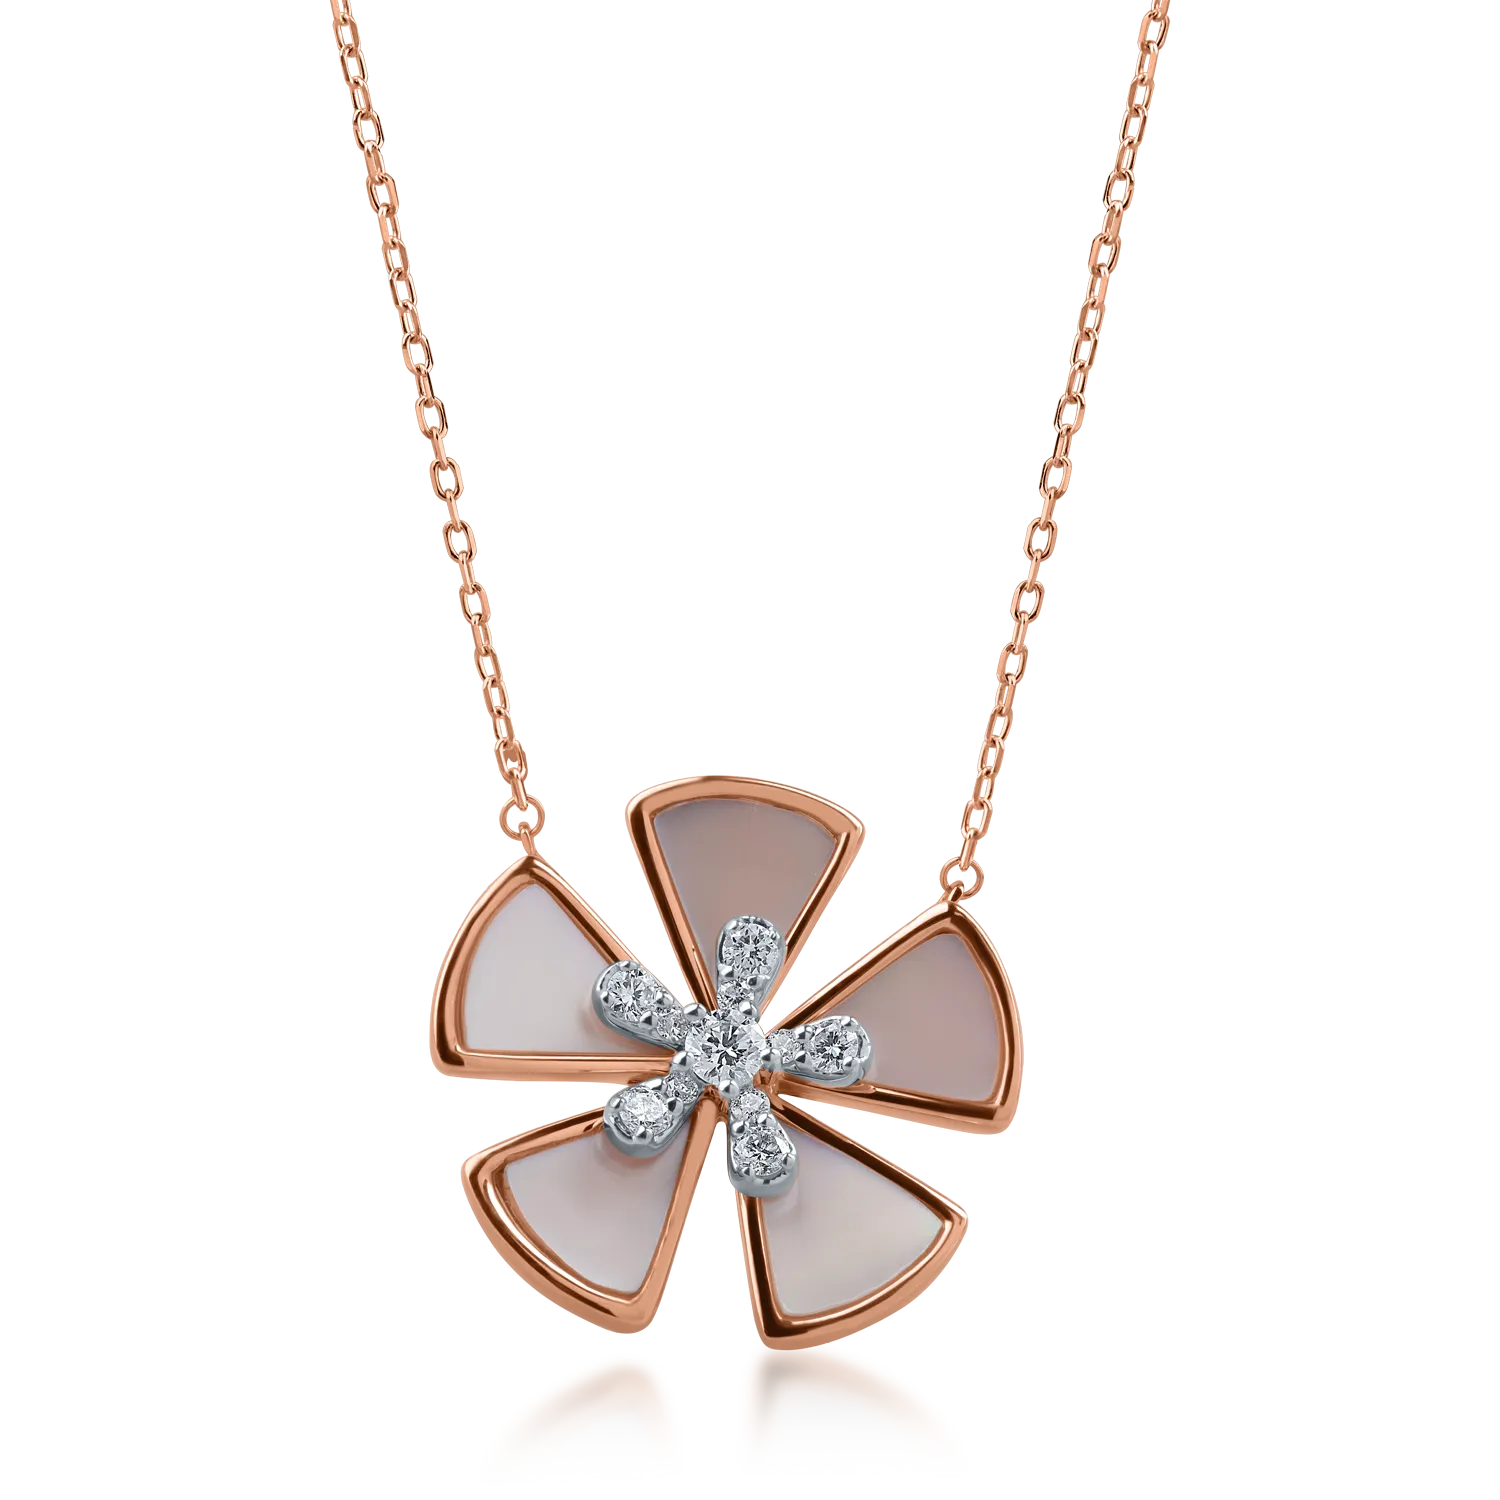 Rose gold flower pendant necklace with 3.21ct mother of pearl and 0.25ct diamonds